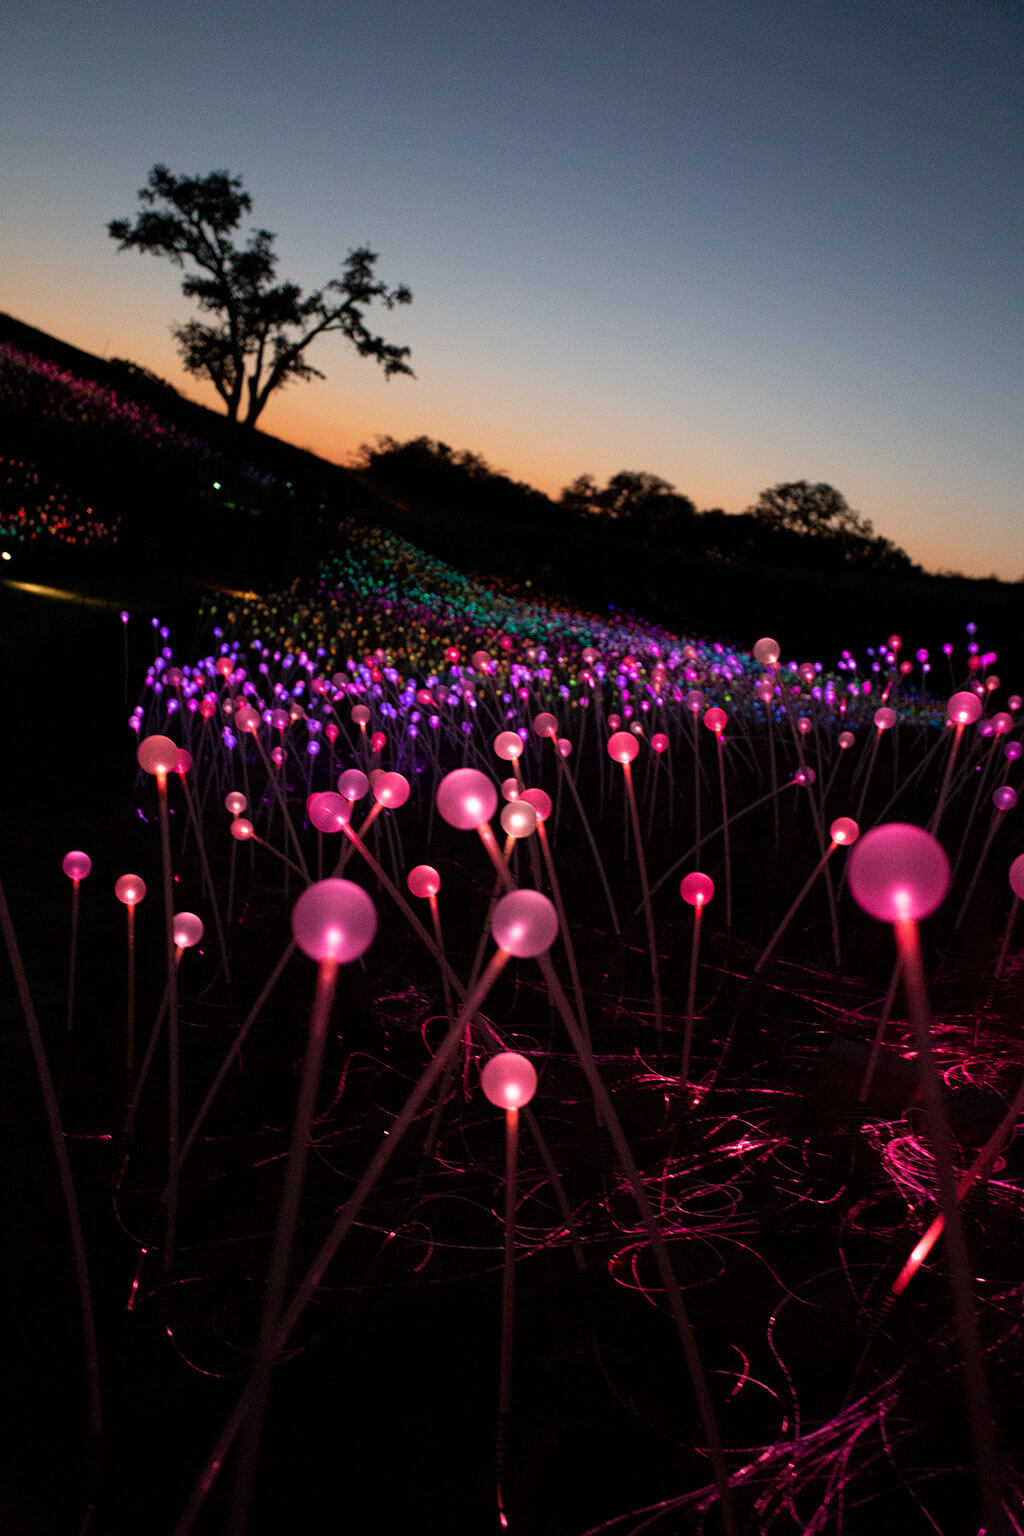 drive-swim-fly-paso-robles-california-sensorio-experience-bruce-munro-led-lights-art-installation-gallery-nature-field-of-light-7